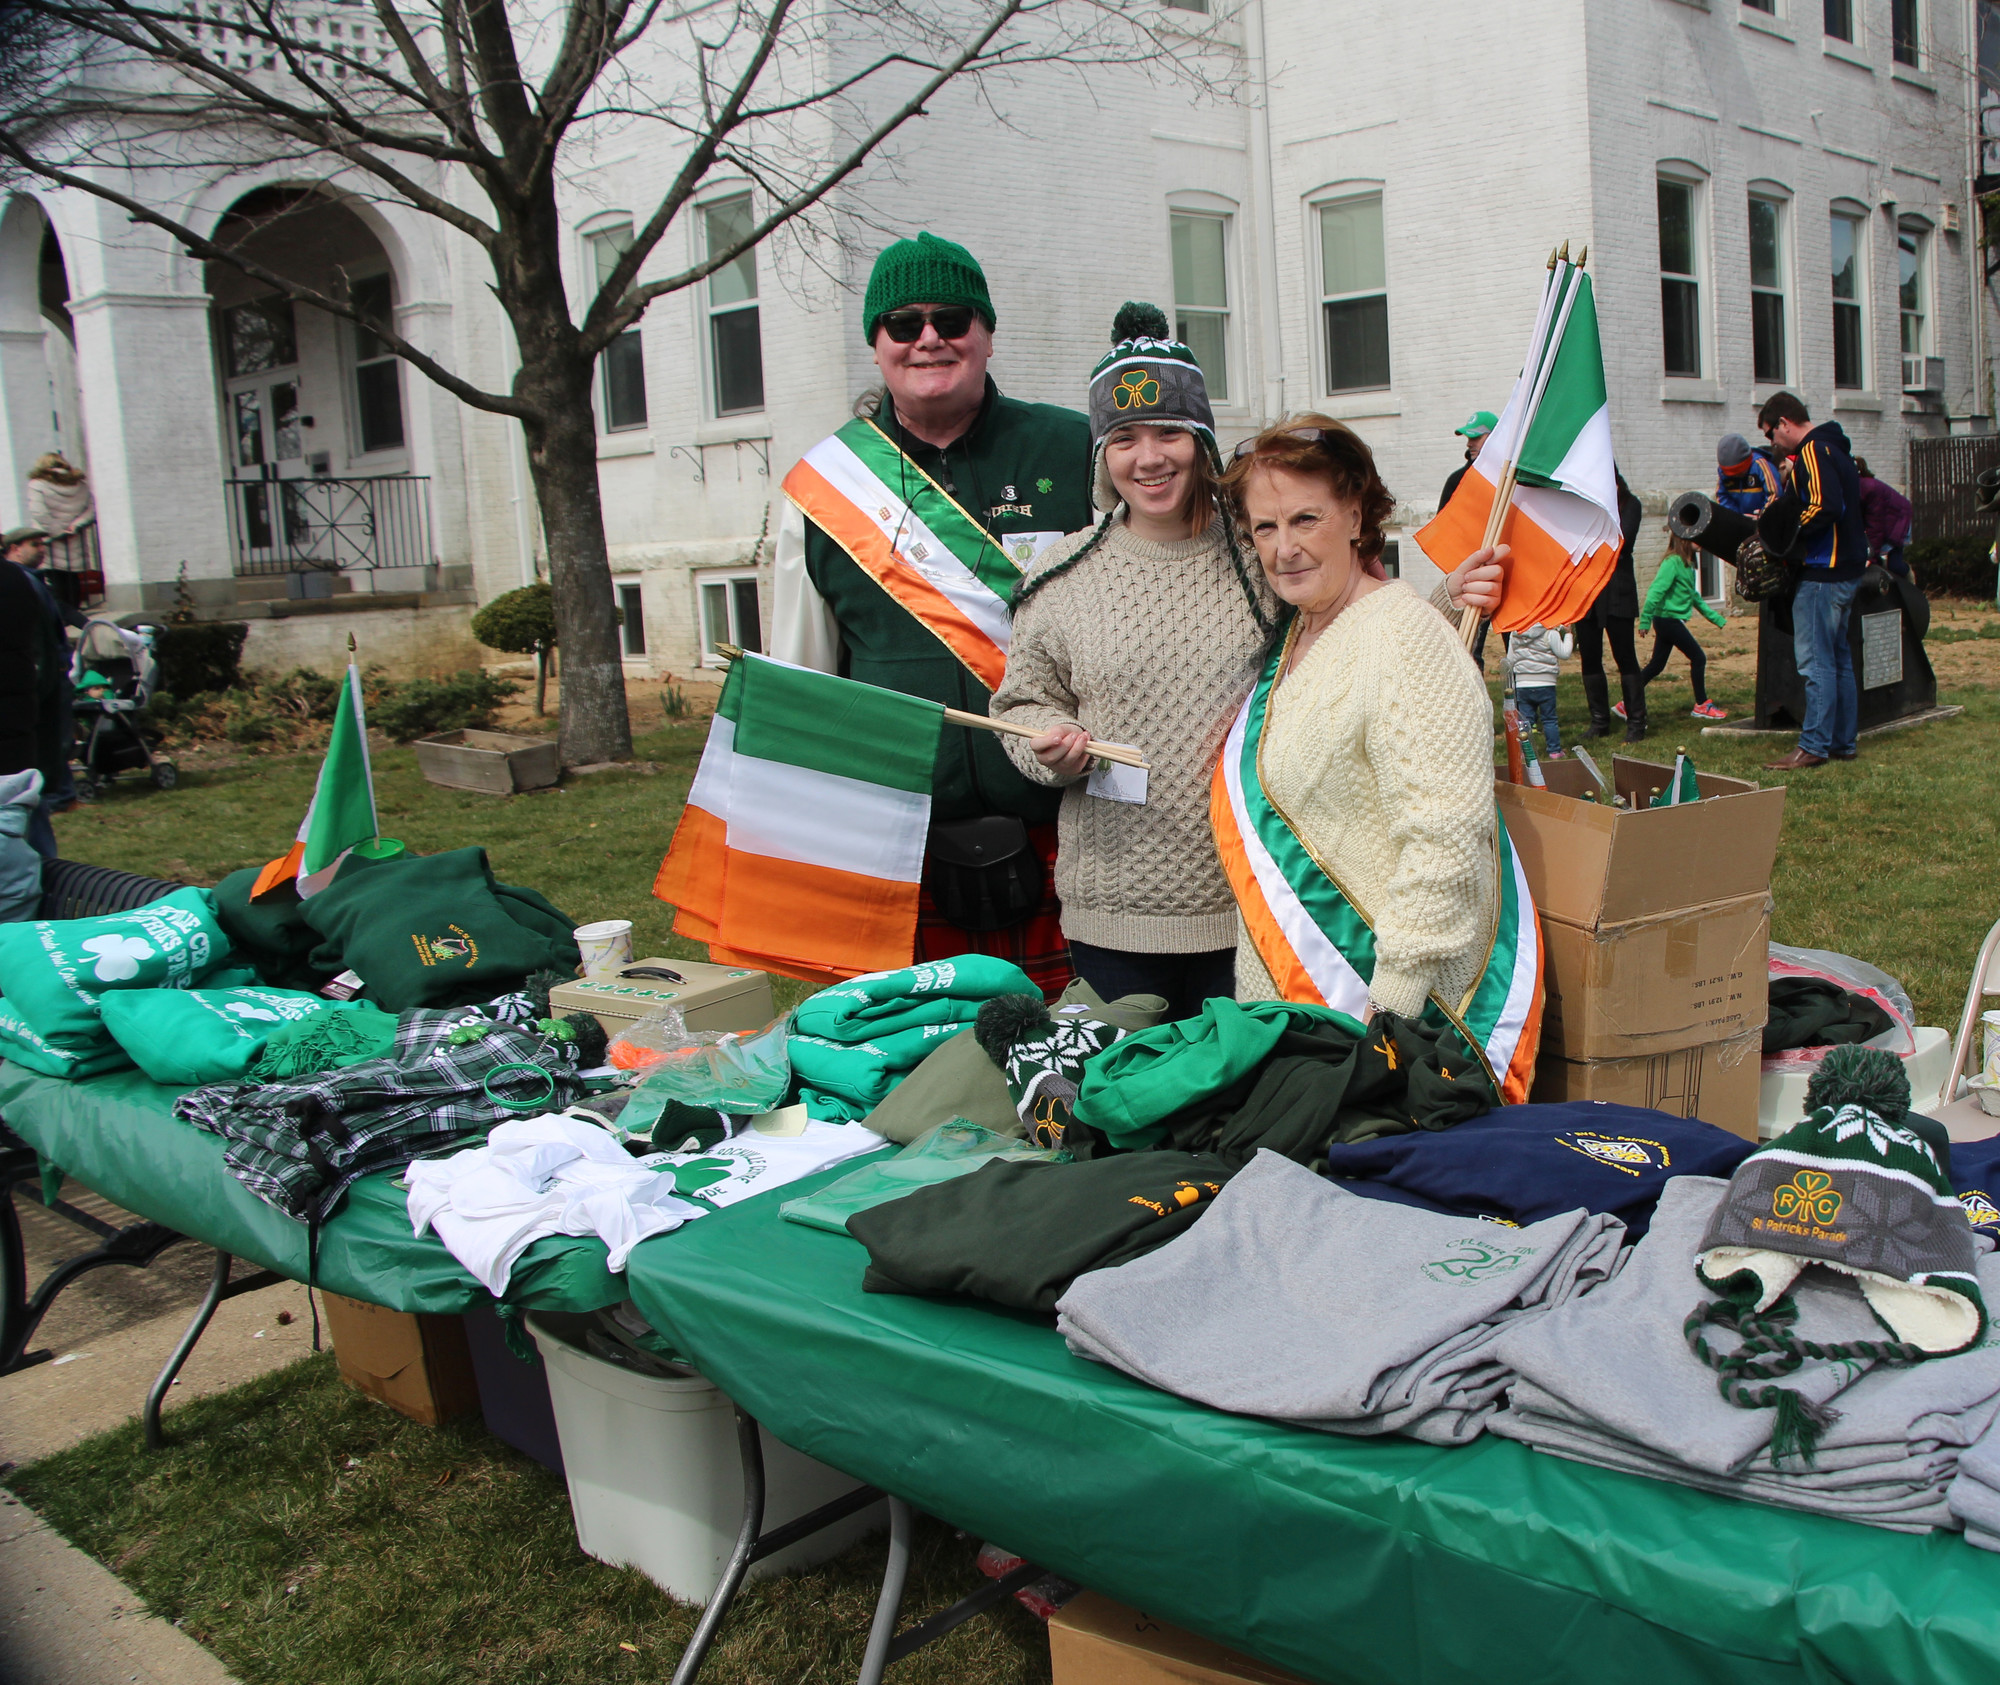 Kevin O’Brien, his daughter, Carolynn, and Kathi Collins sold official parade merchandise. The sales helped support the parade’s three chosen charities.